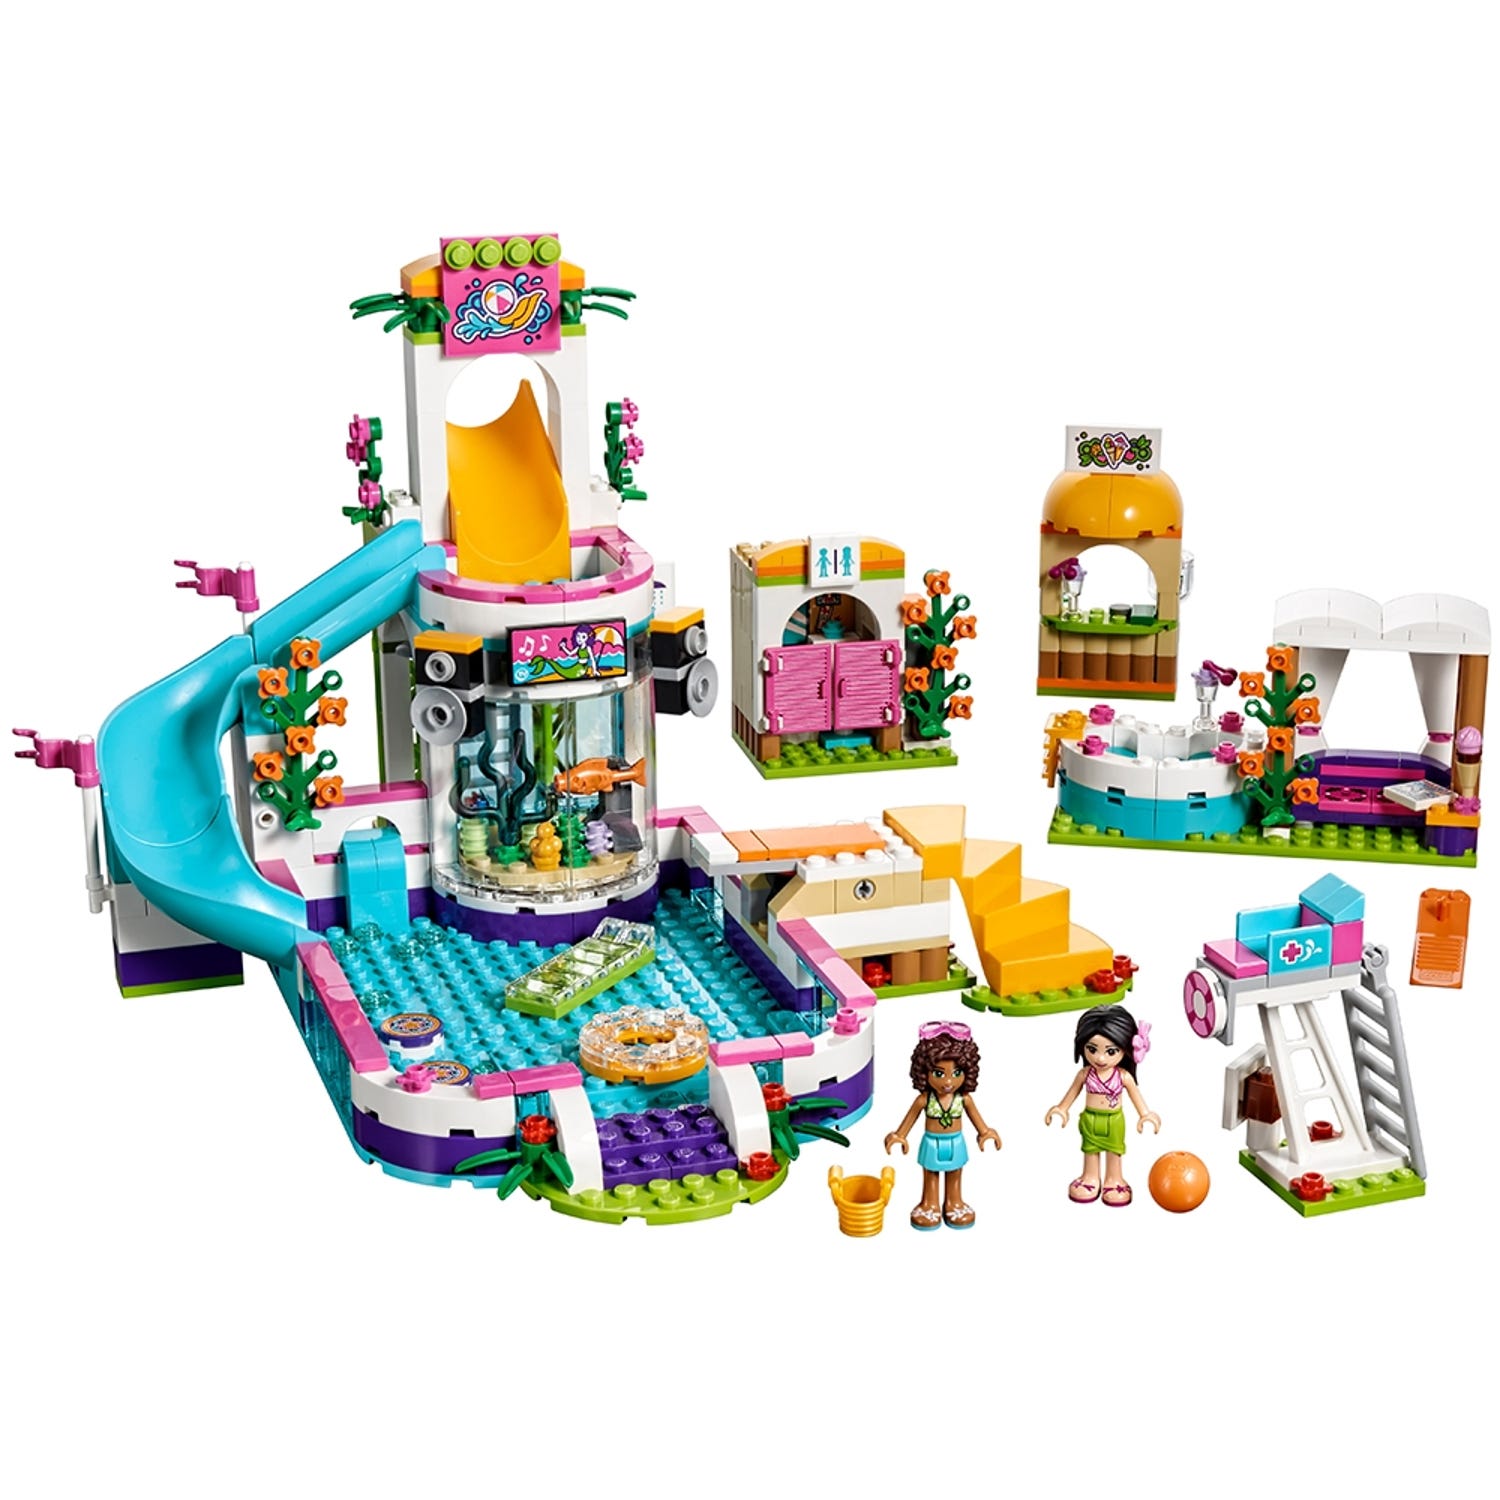 Summer Pool 41313 | Friends | Buy online the Official LEGO® Shop US